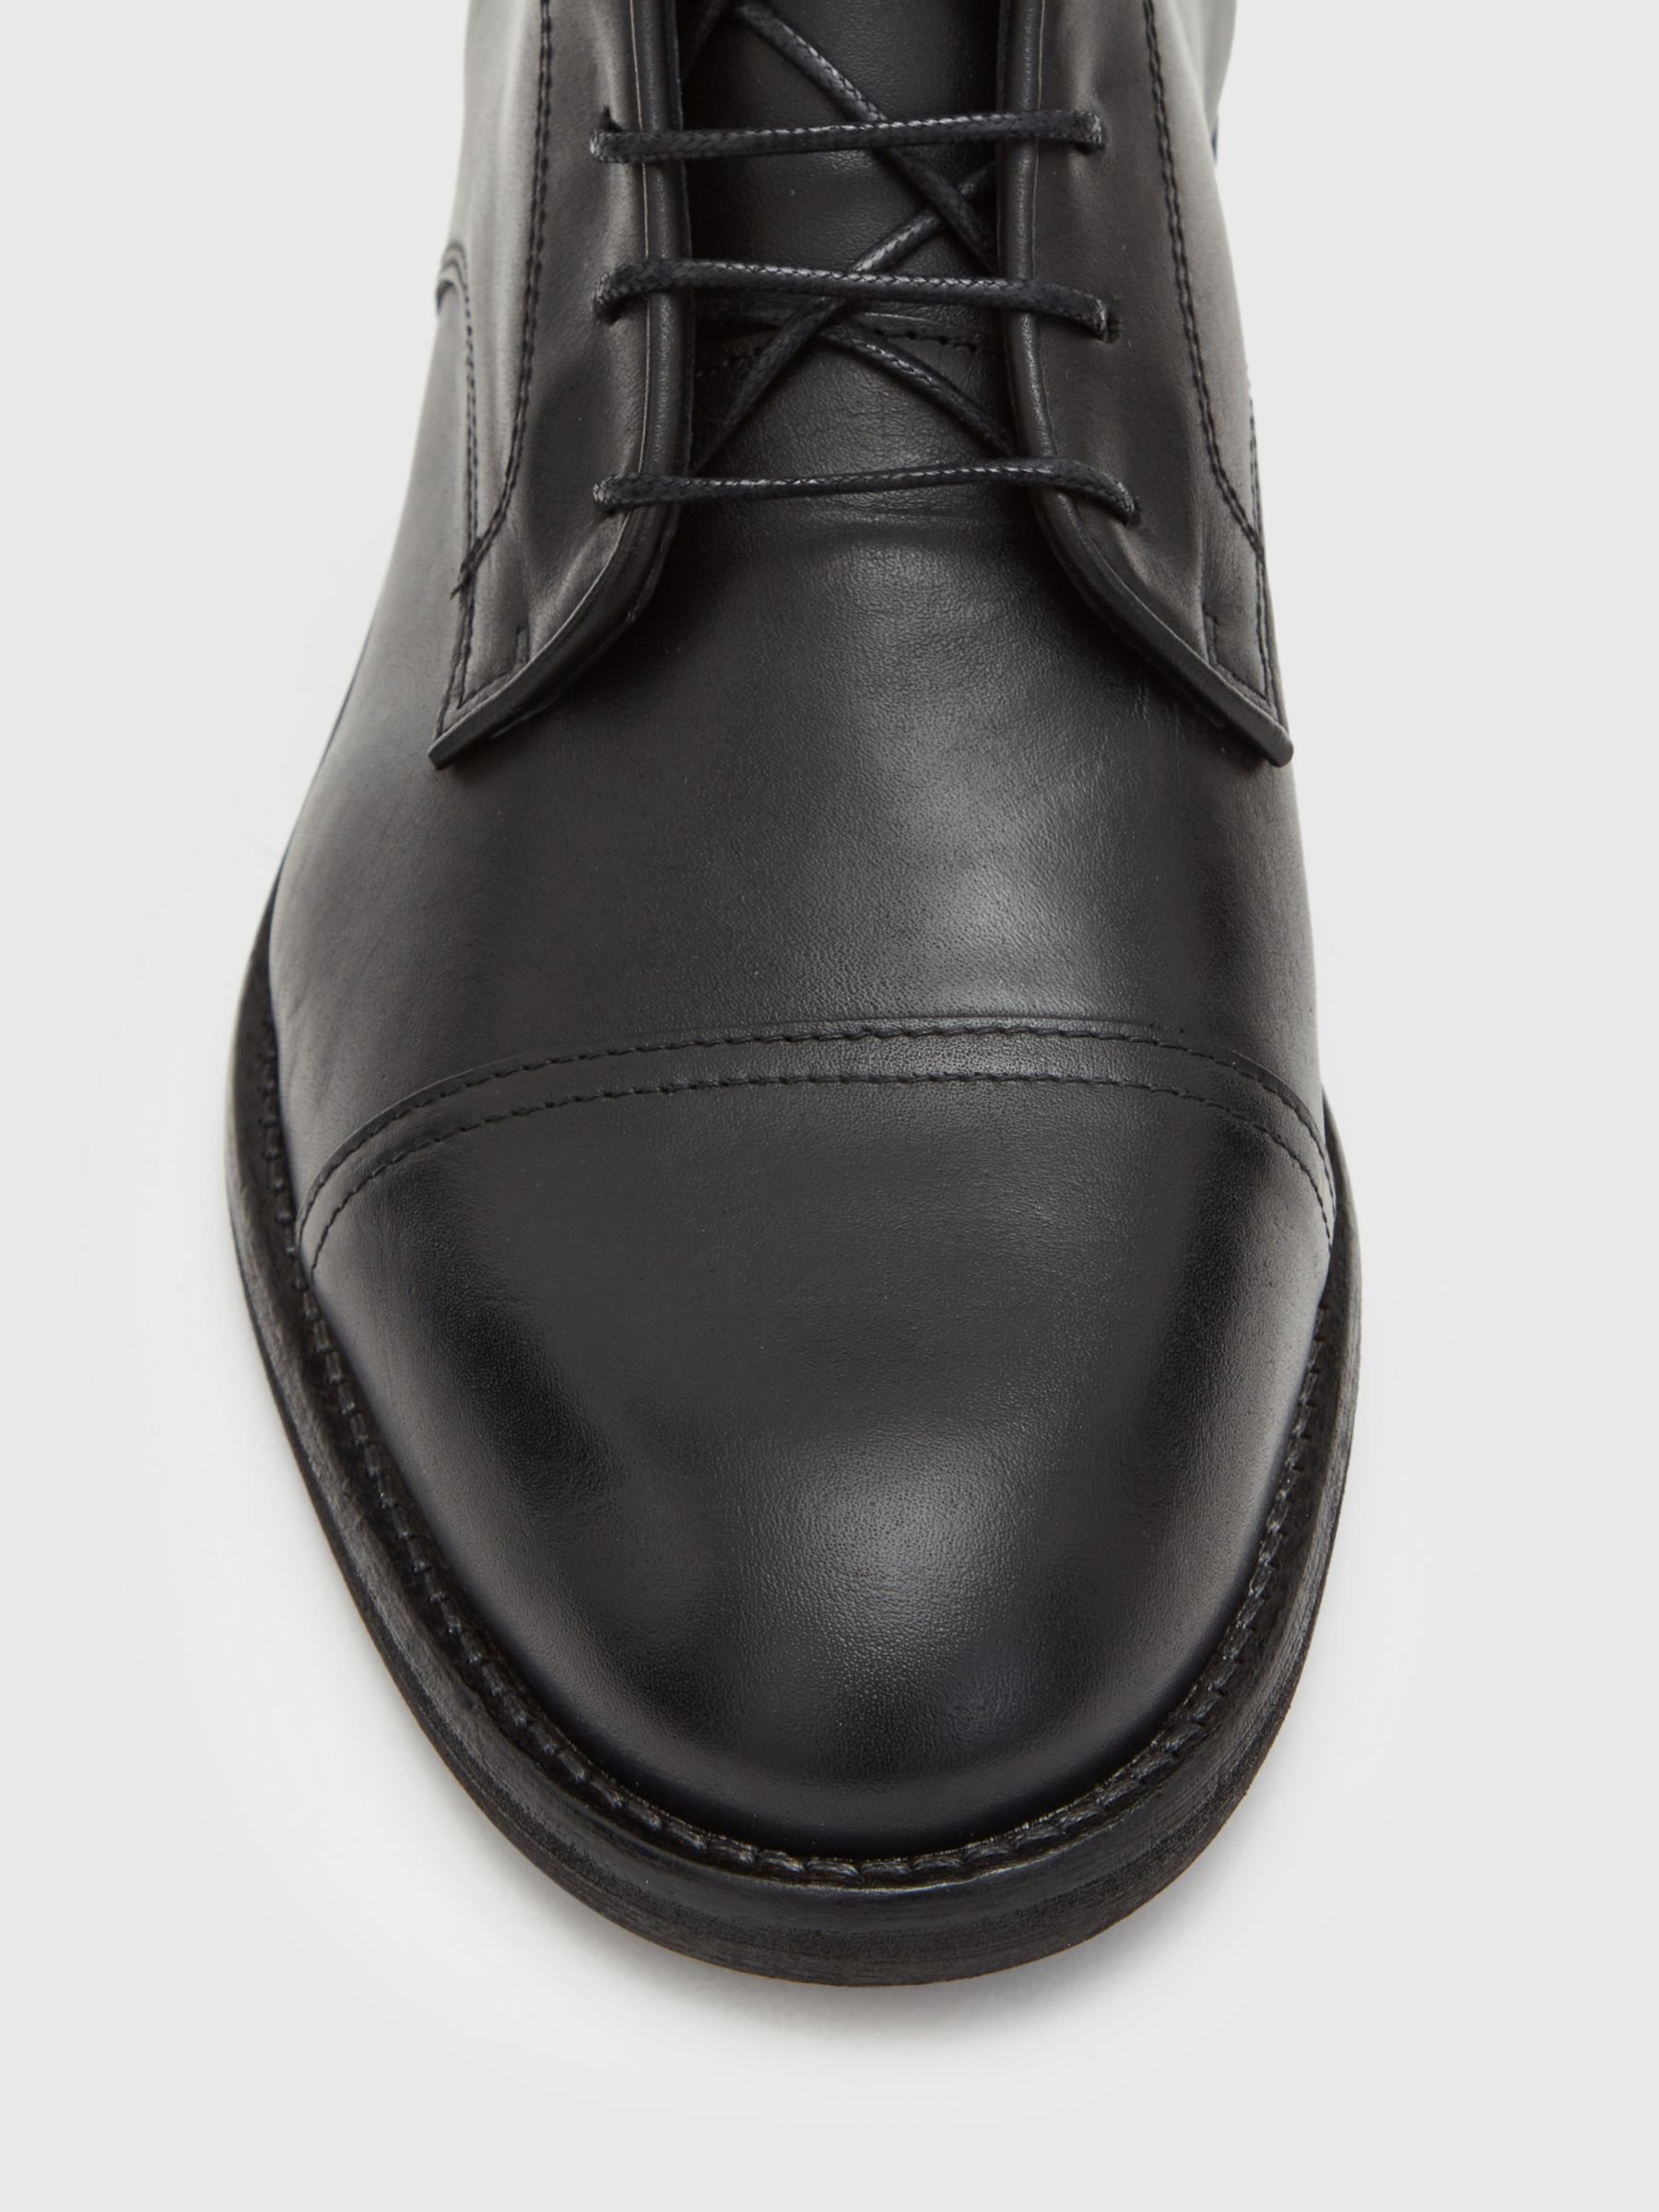 AllSaints Harland Leather Boots, Black at John Lewis & Partners